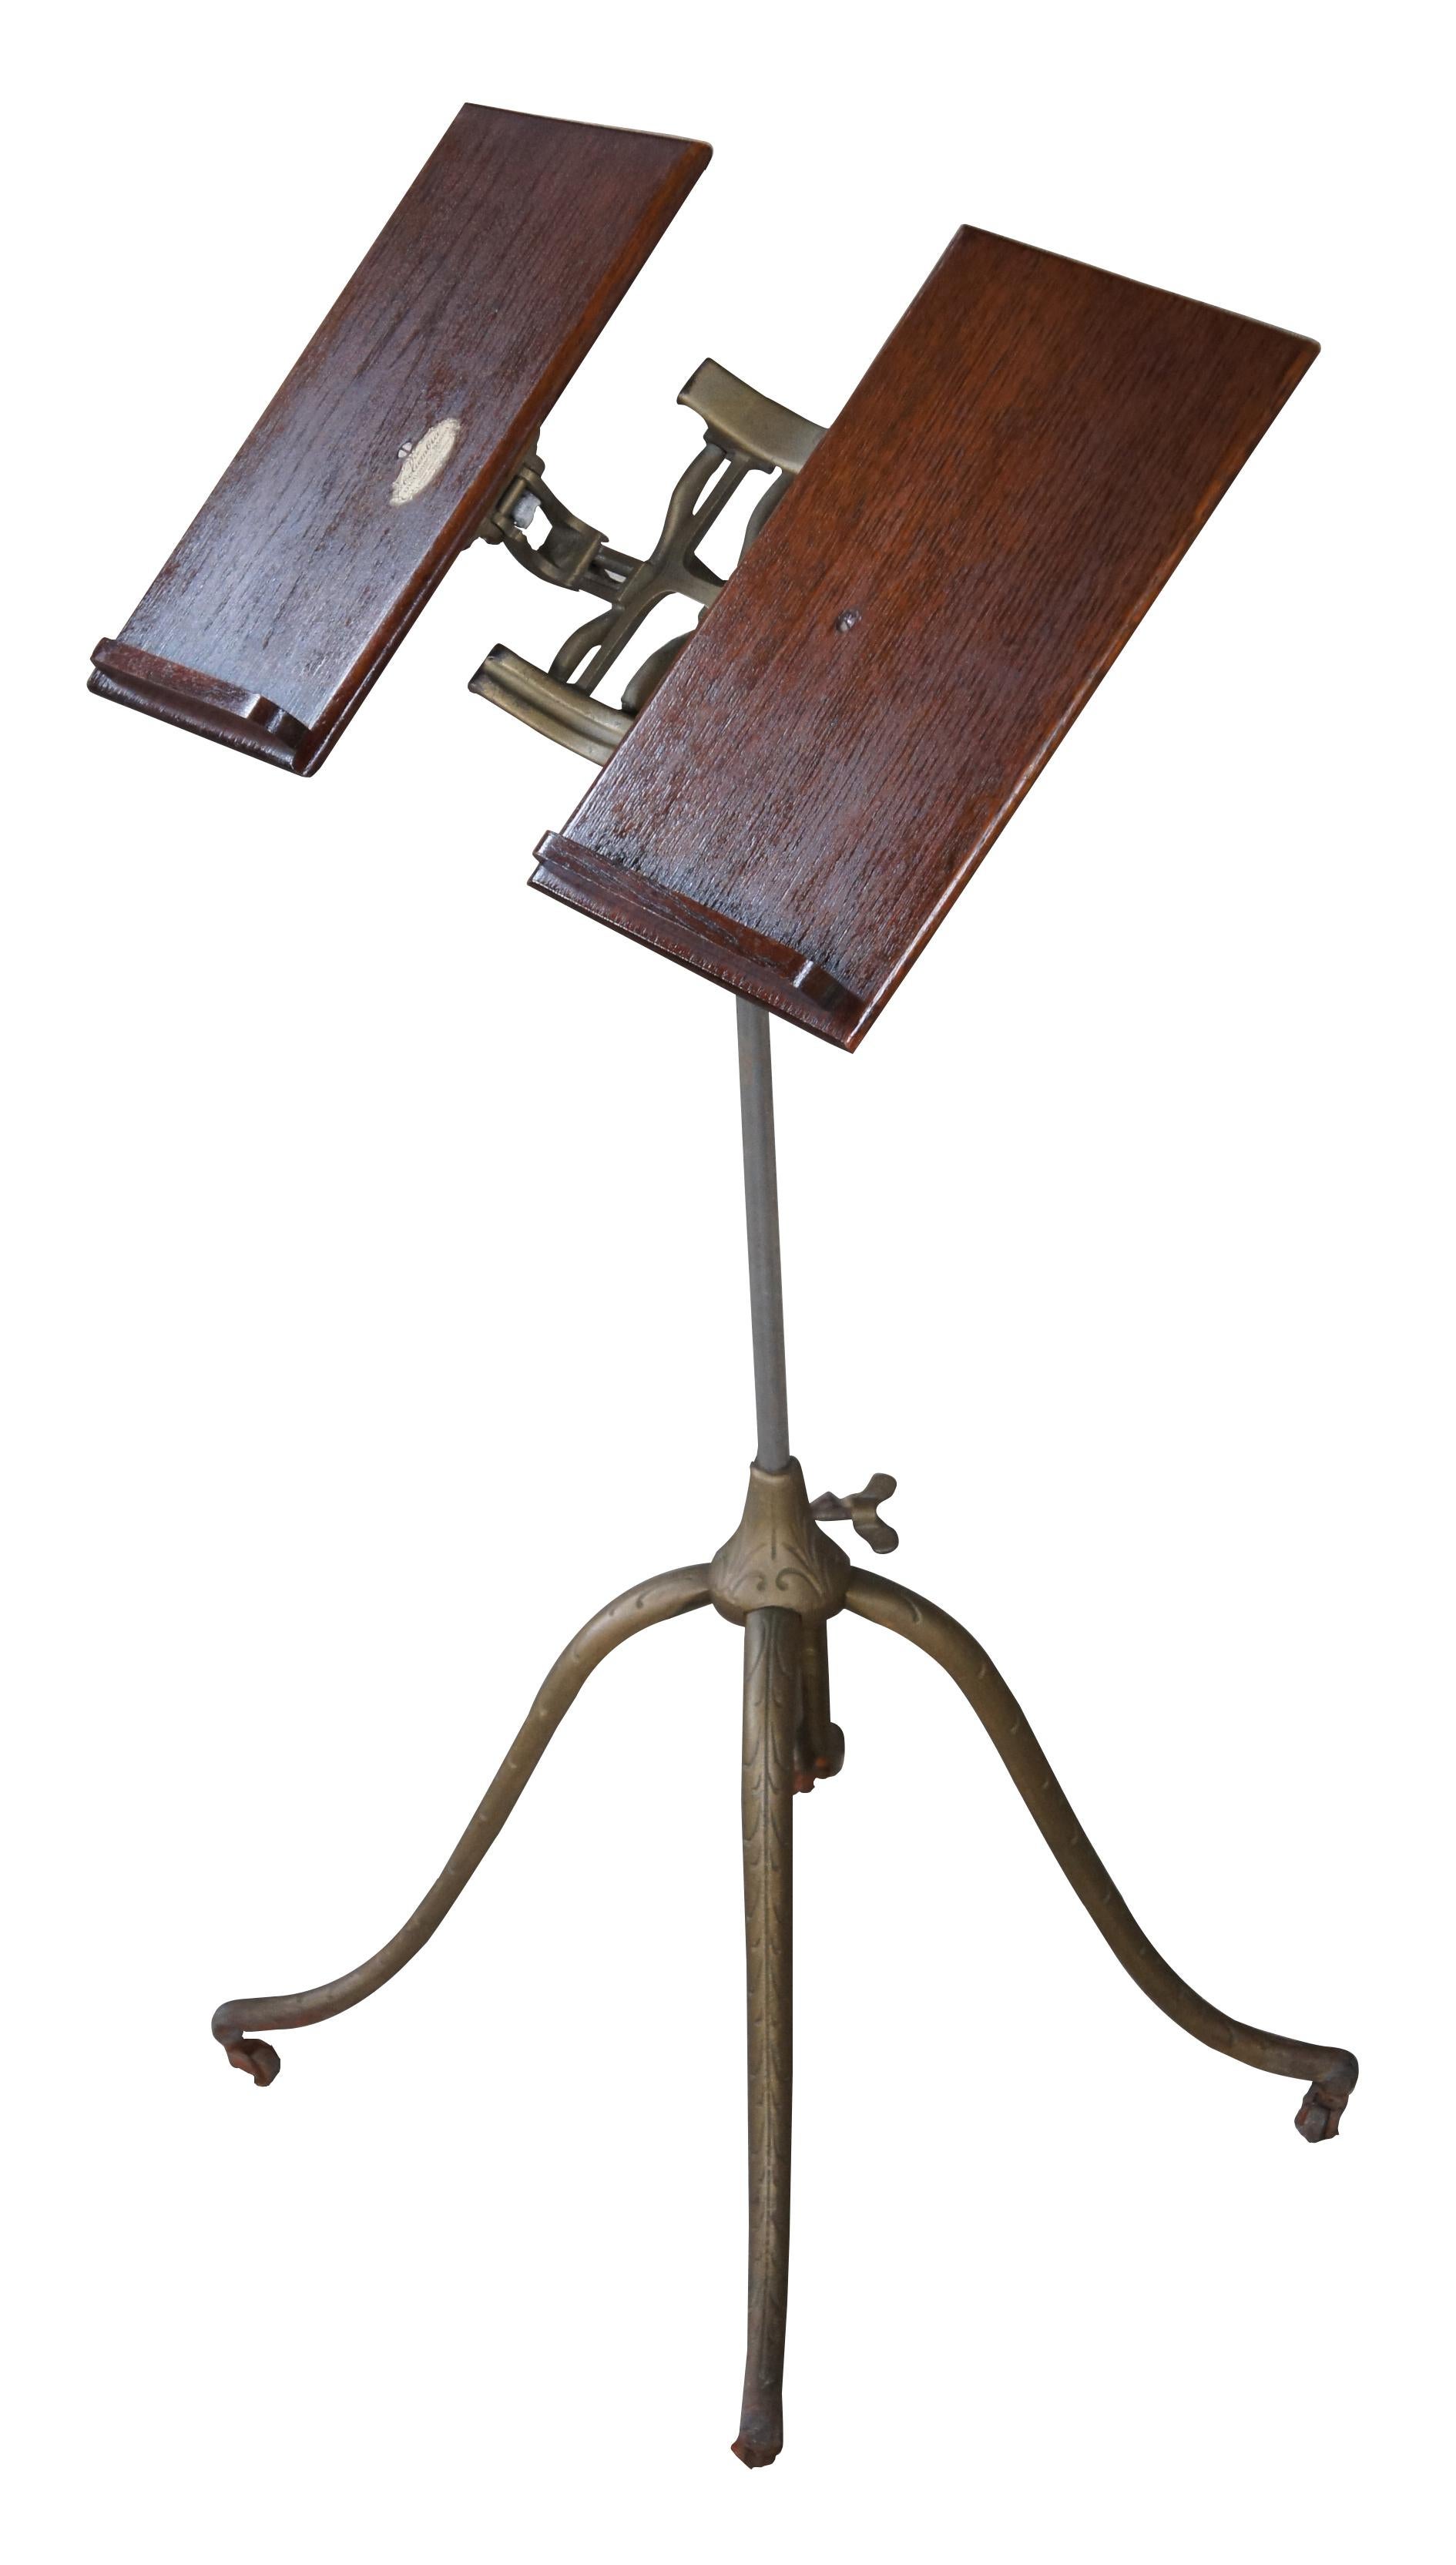 Antique adjustable Columbia Dictionary library stand by Josiah Anstice & Co of Rochester New York featuring ornate wrought iron pedestal base and quartersawn oak book holder. Circa 1895.

Measures: 24